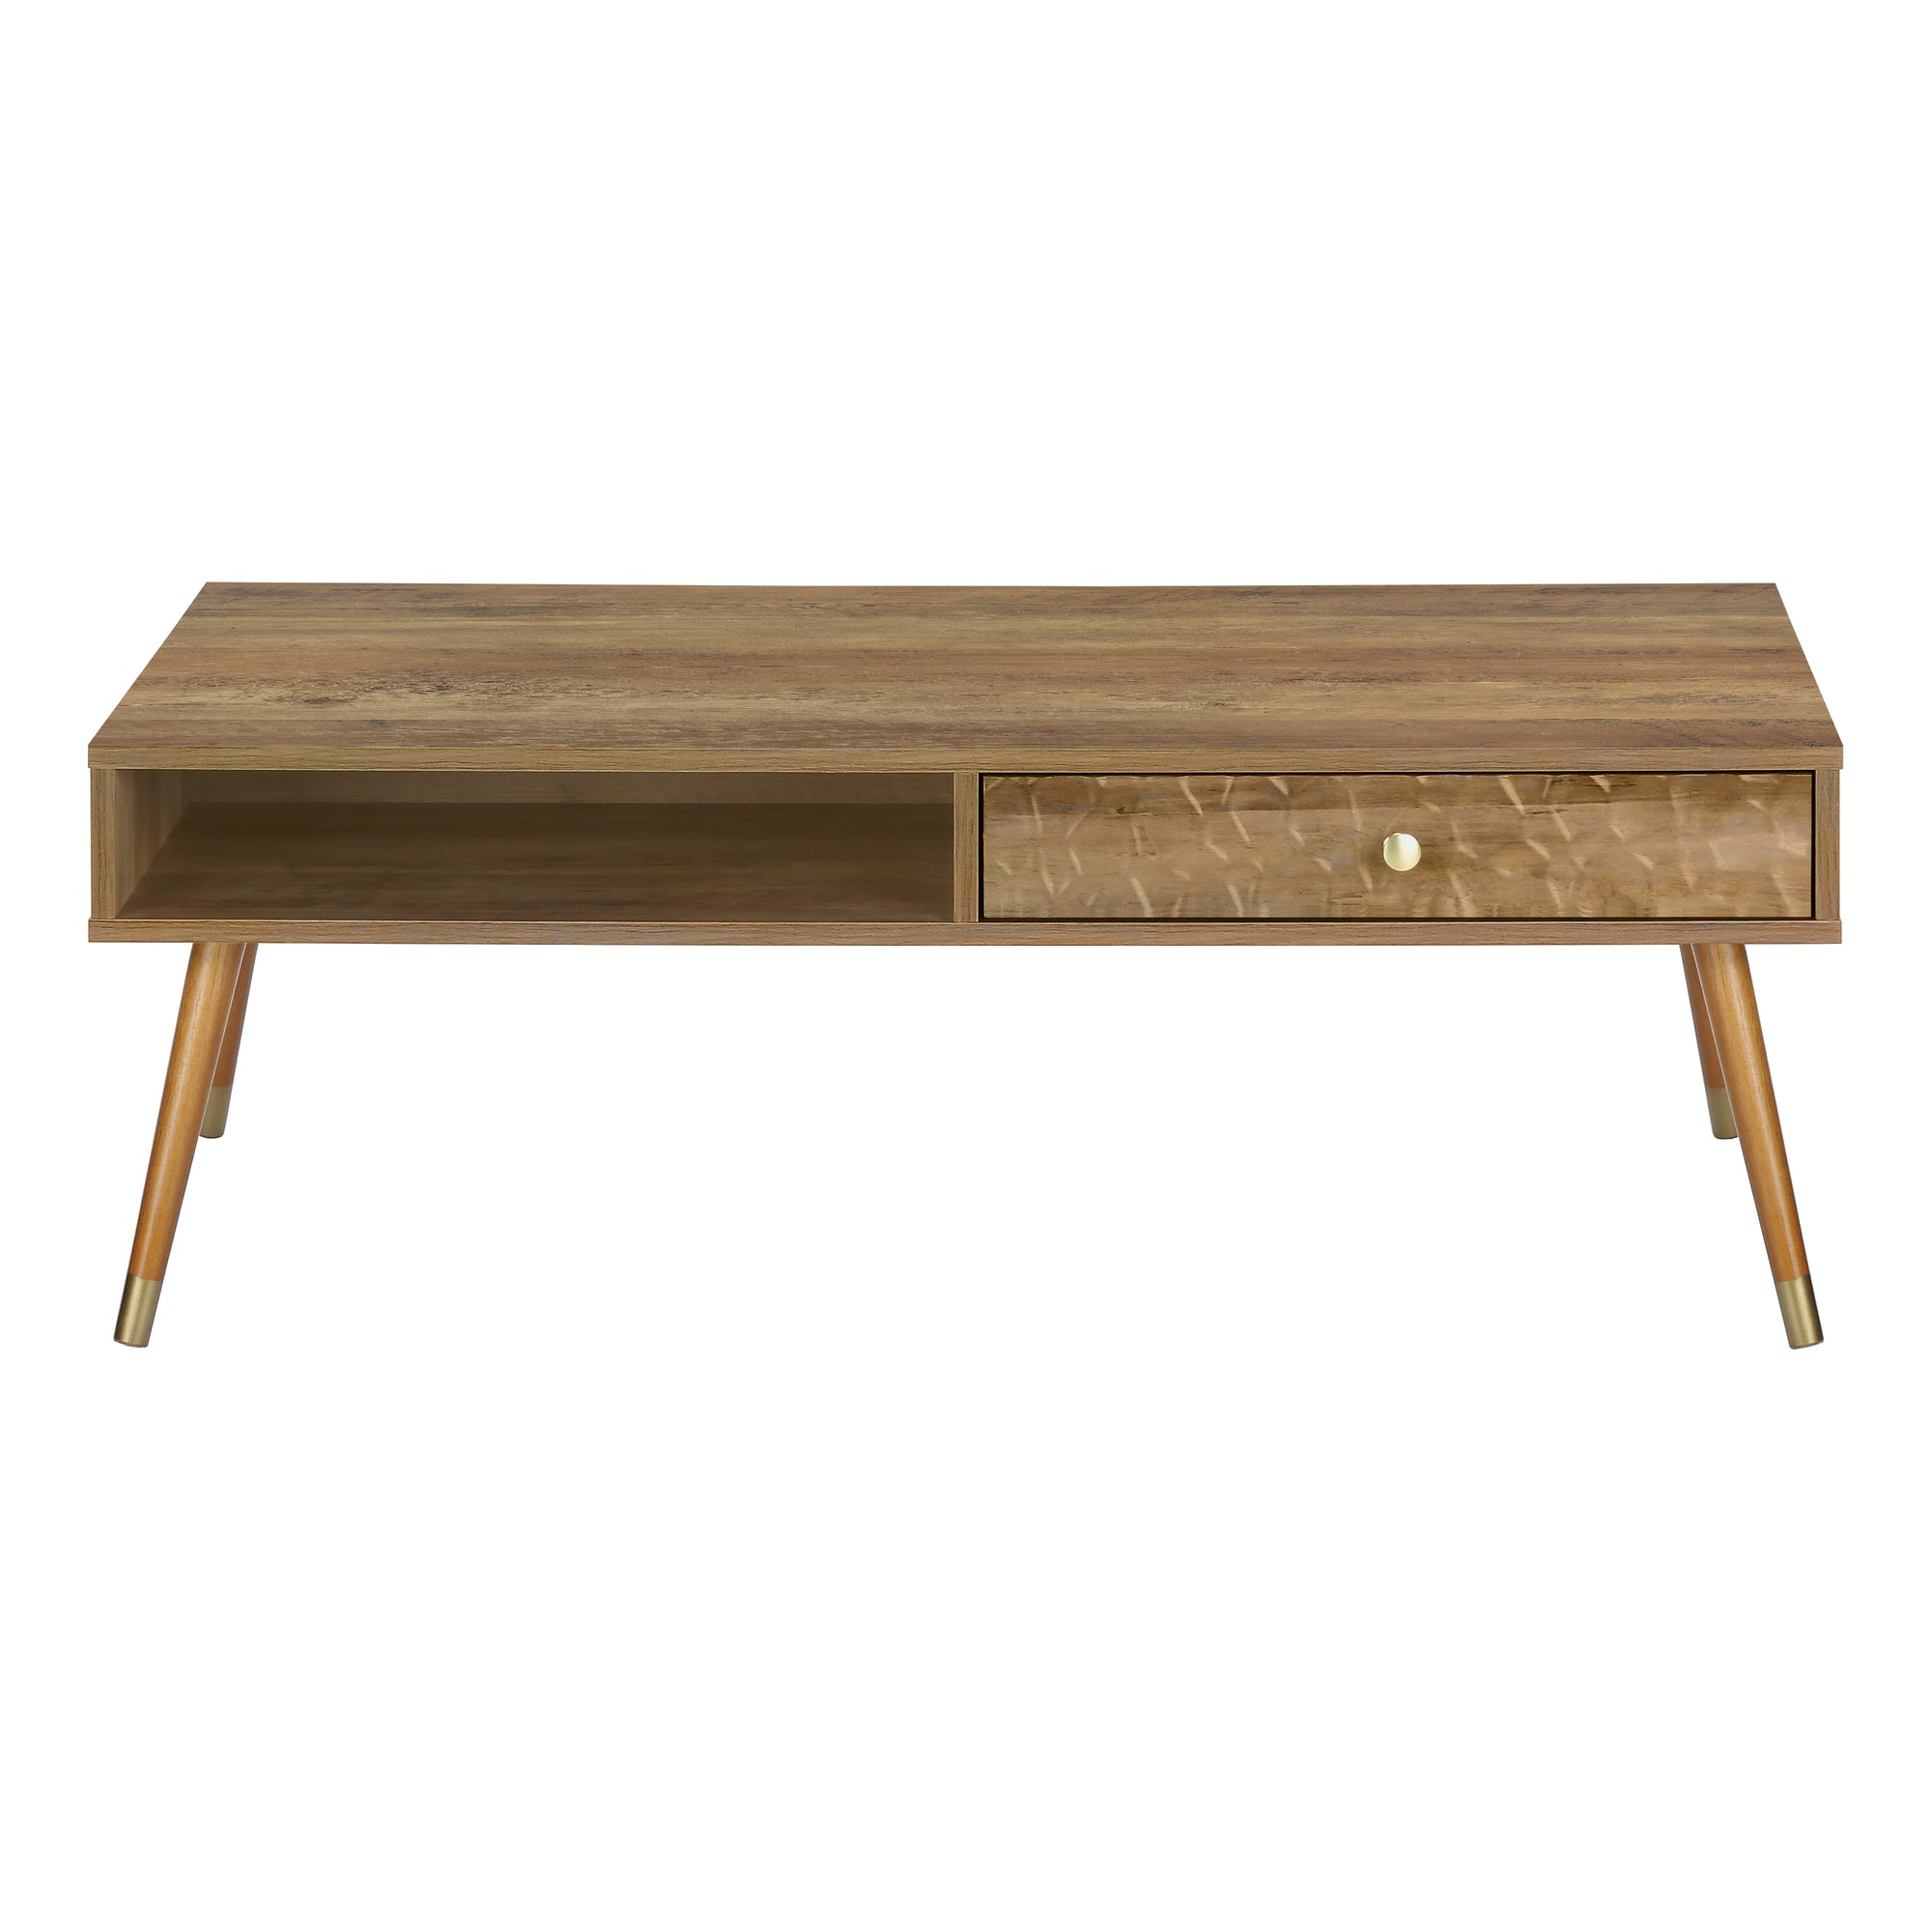 MN-502836    Coffee Table, Accent, Cocktail, Rectangular, Storage, Living Room, Solid Wood Legs, Laminate, Walnut, Contemporary, Modern